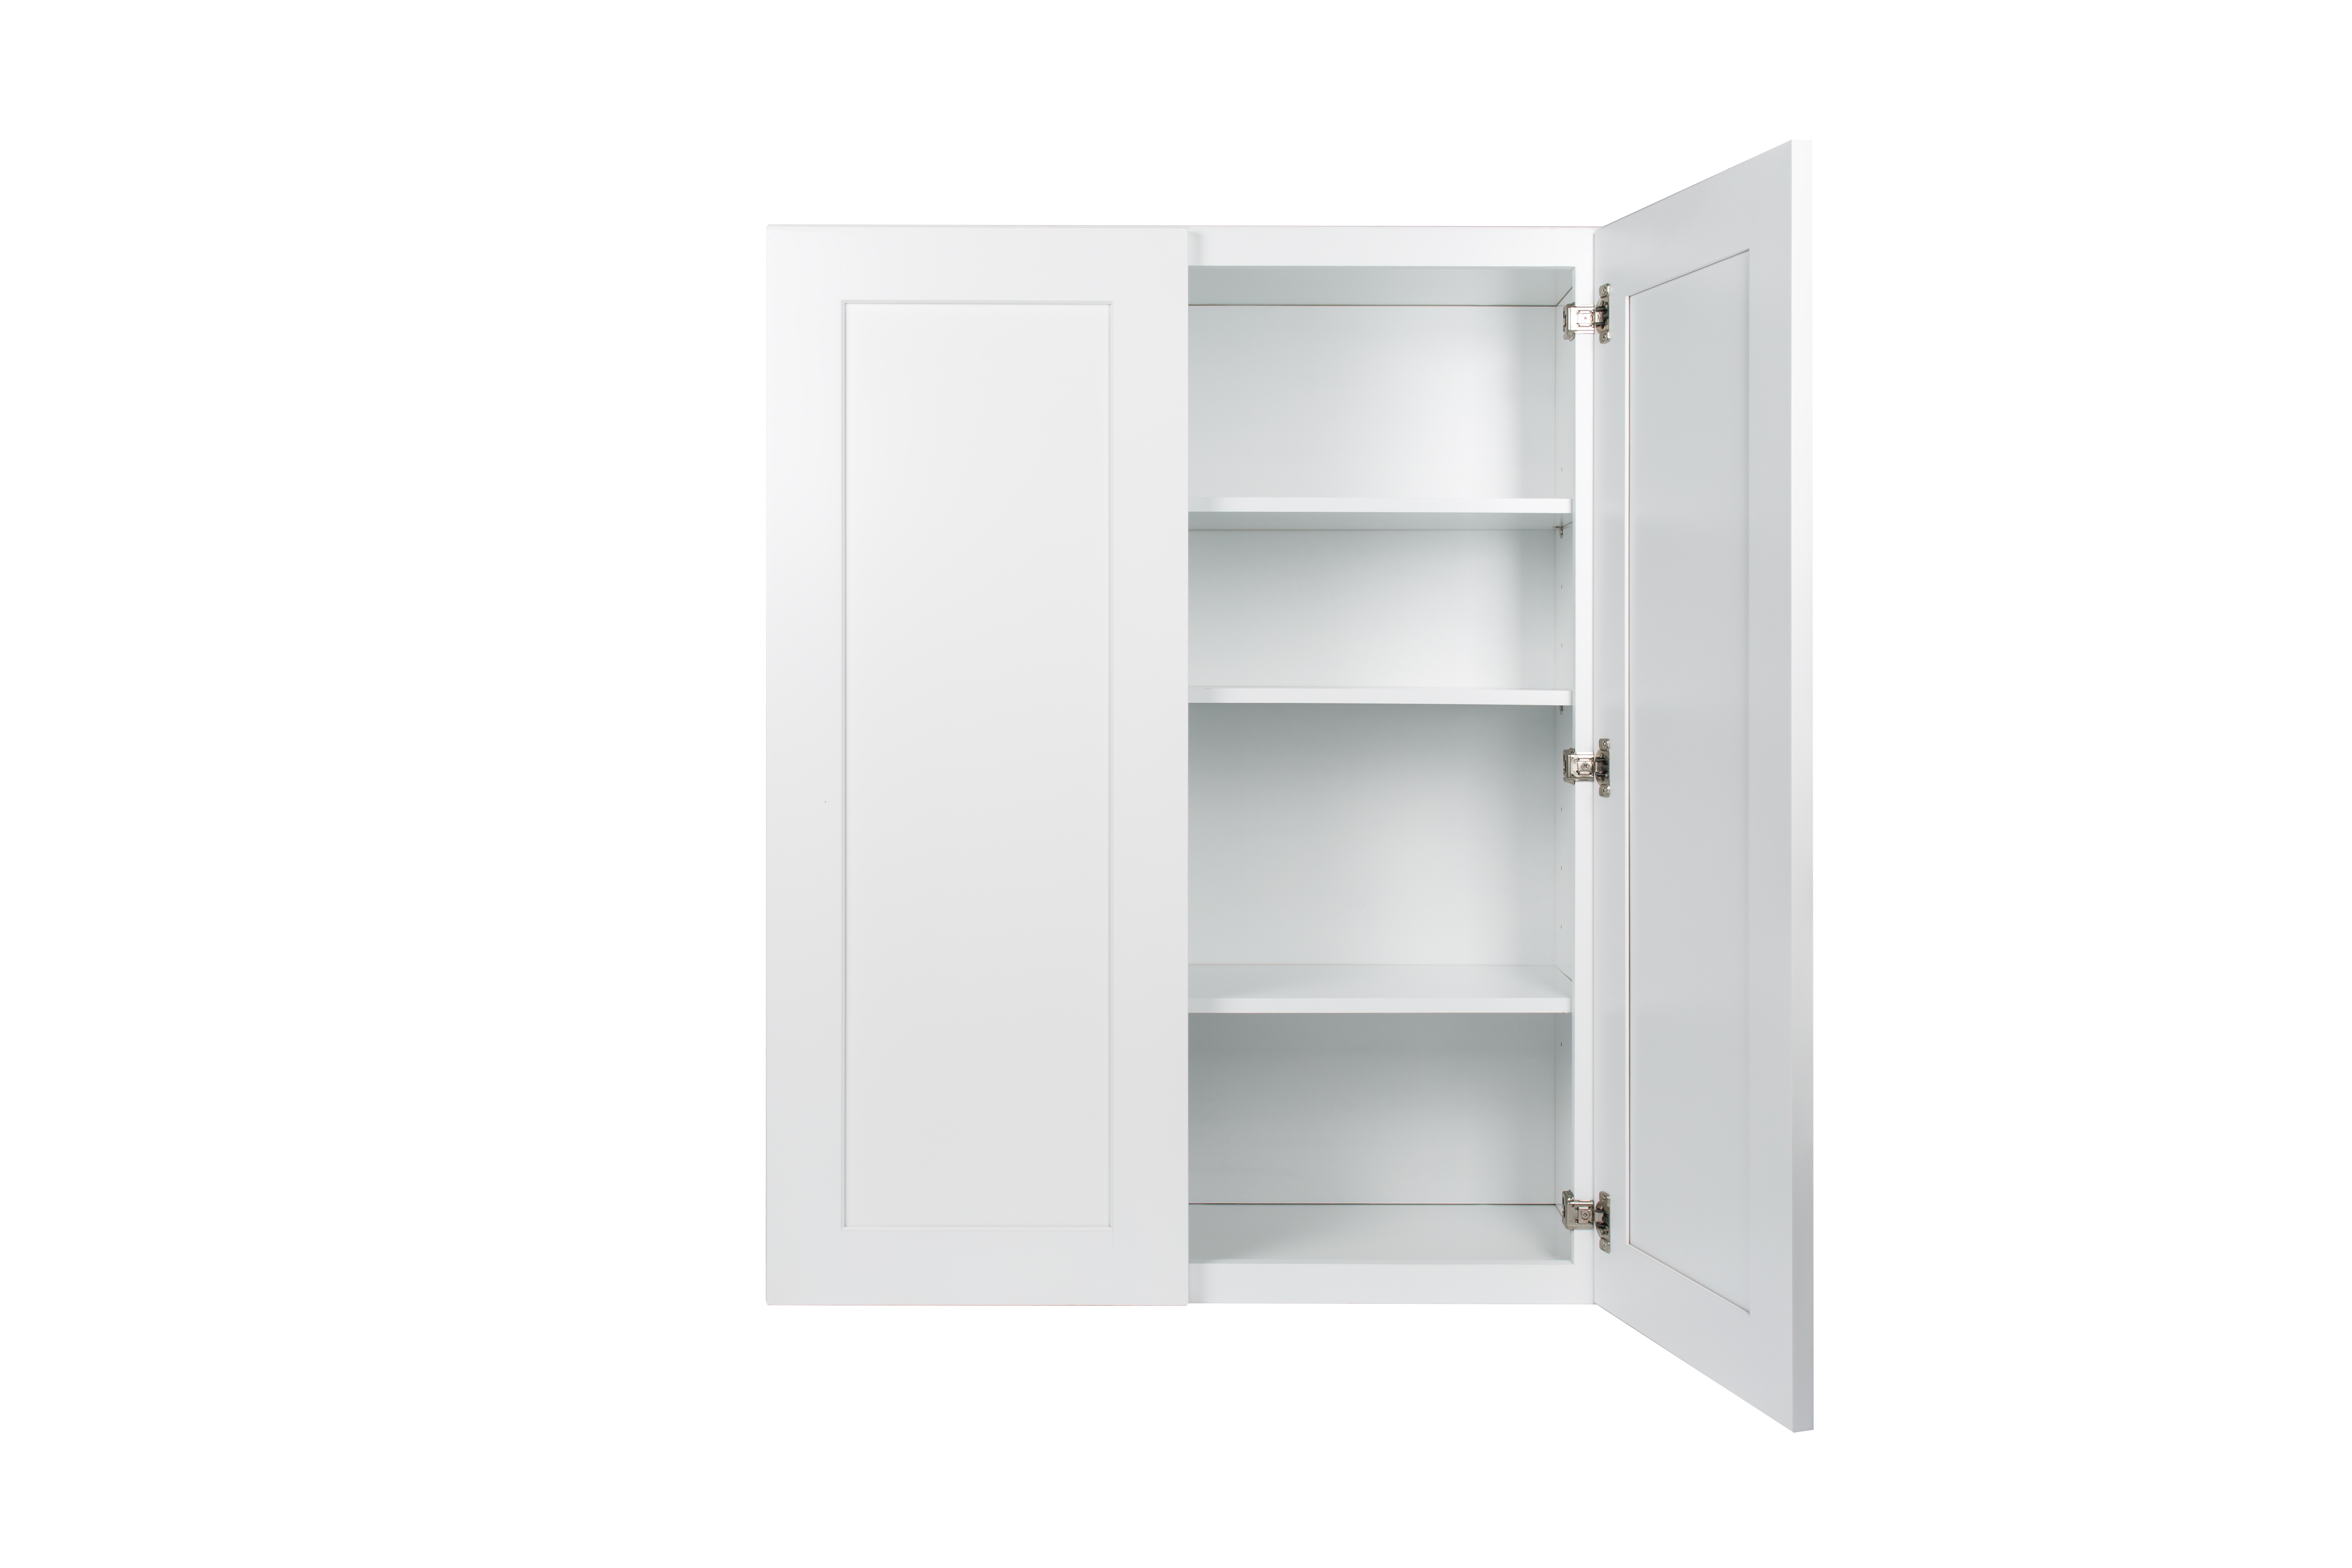 Ready to Assemble 24x42x12 in. Wall Cabinets with 2 Doors and 2 Adjustable Shelves in Shake White